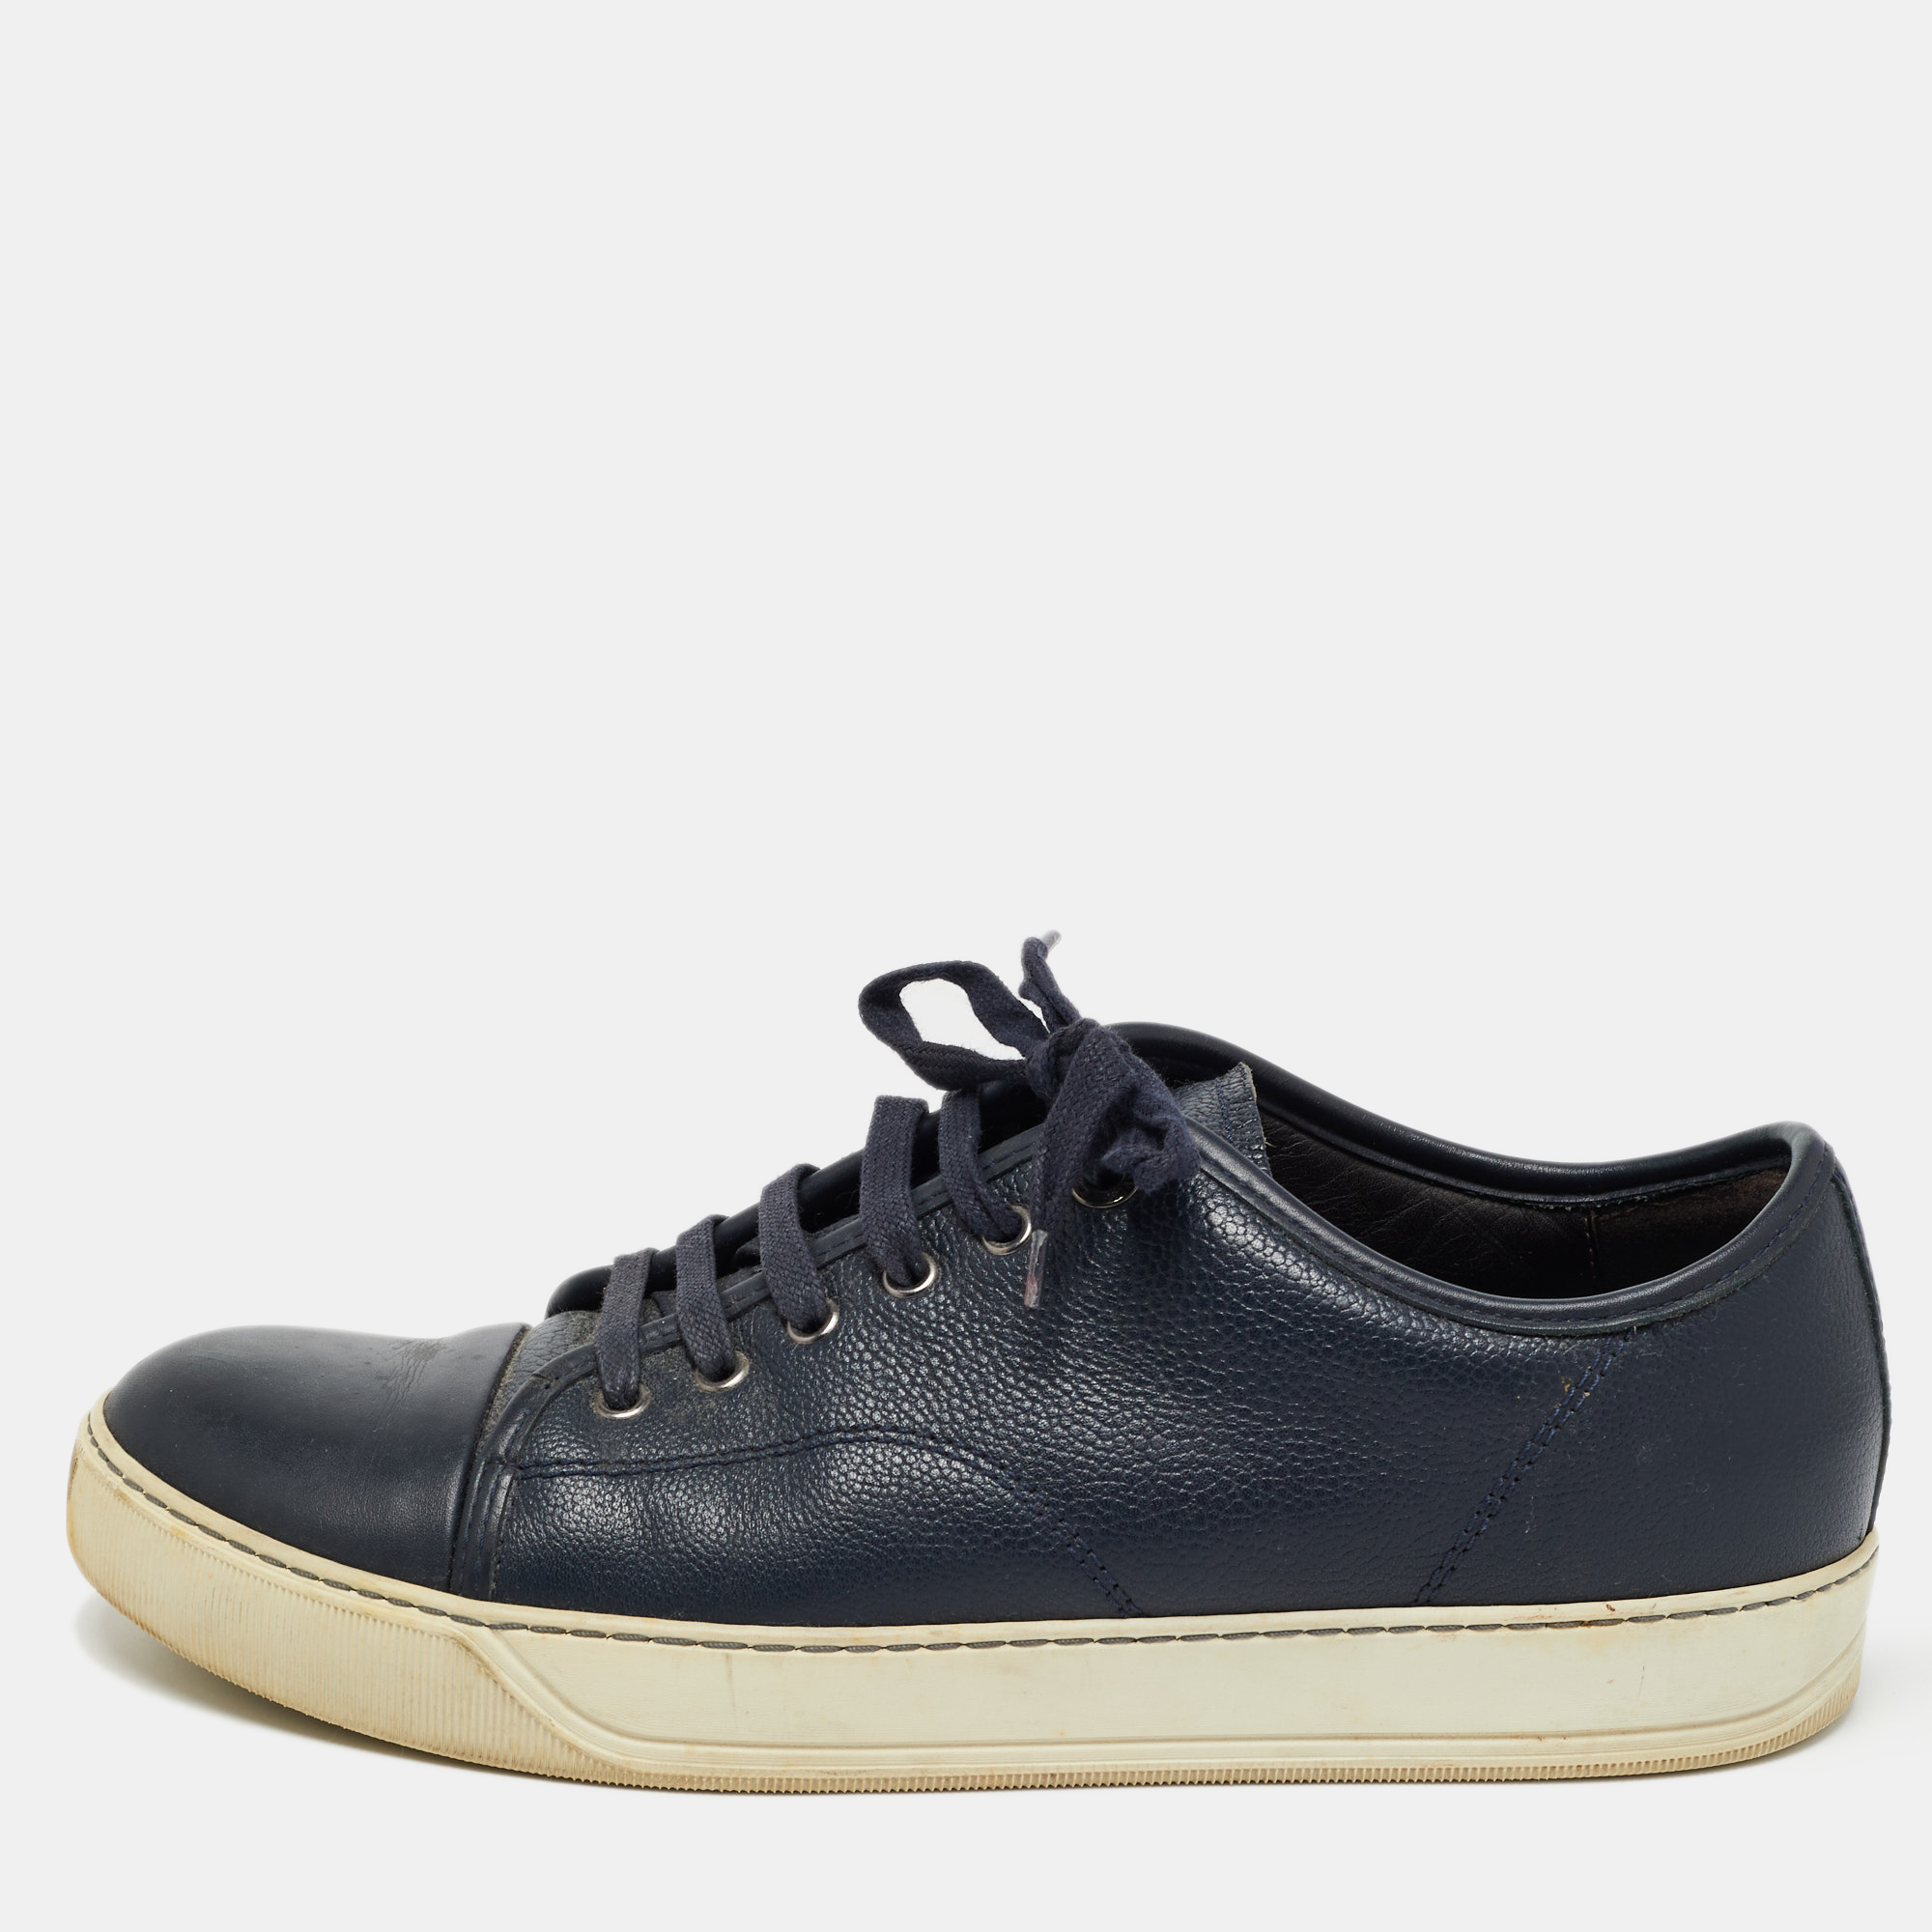 Lanvin Leather Navy Blue Leather Low Top Sneakers Size 41